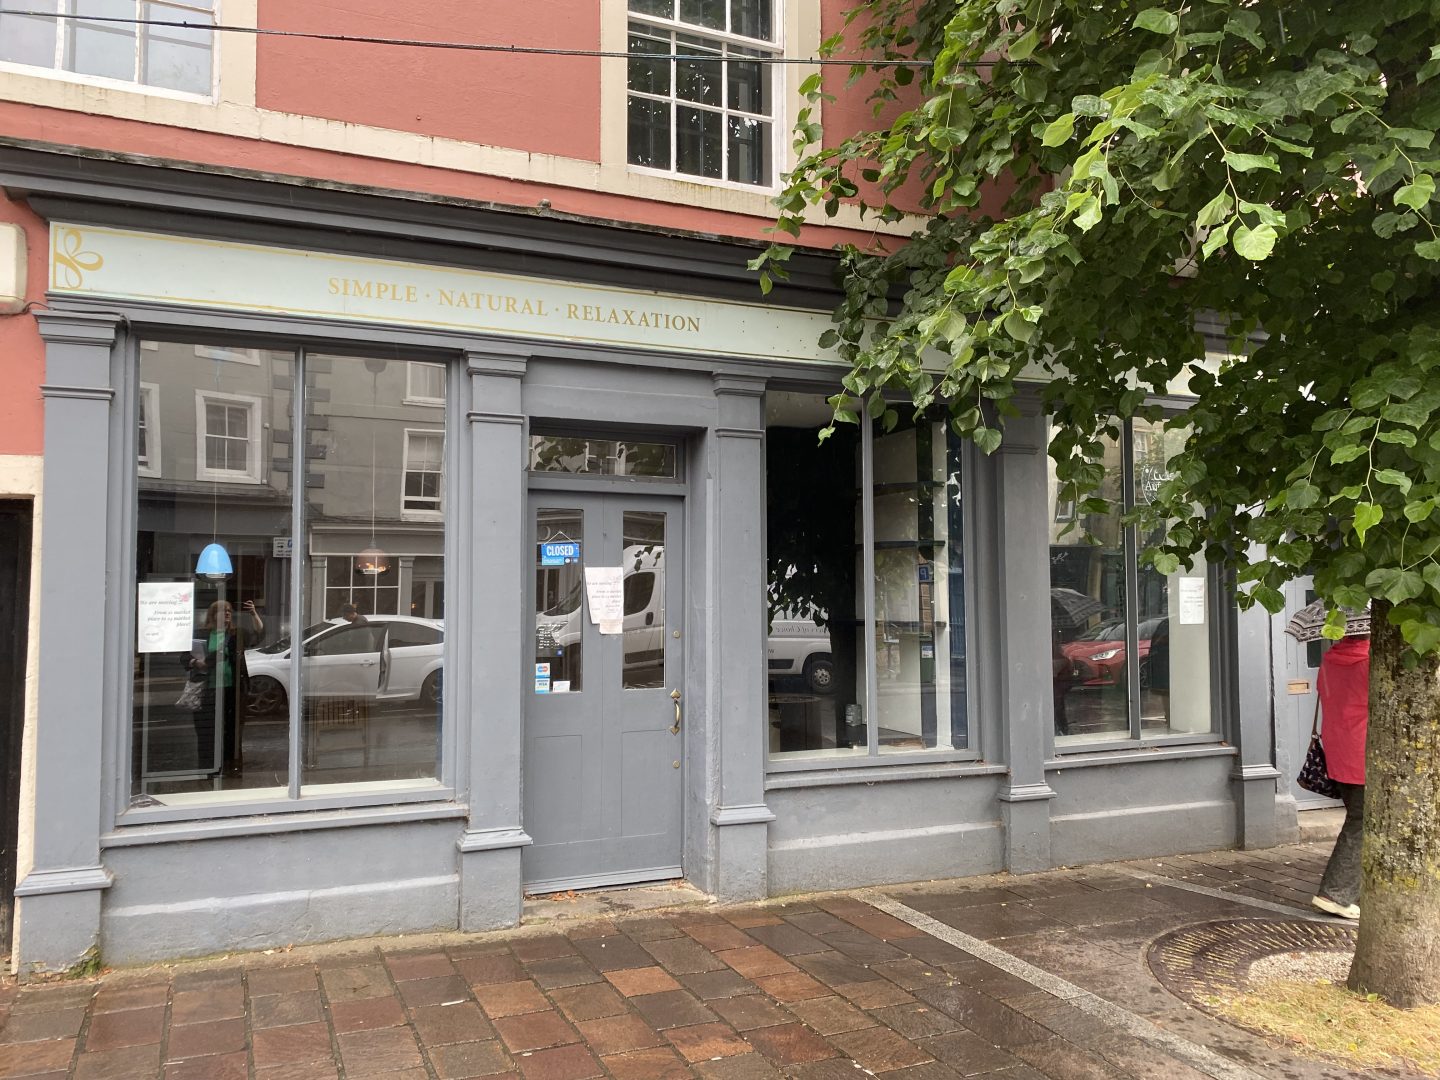 21 Market Place, Cockermouth – LET (SUBJECT TO CONTRACT)